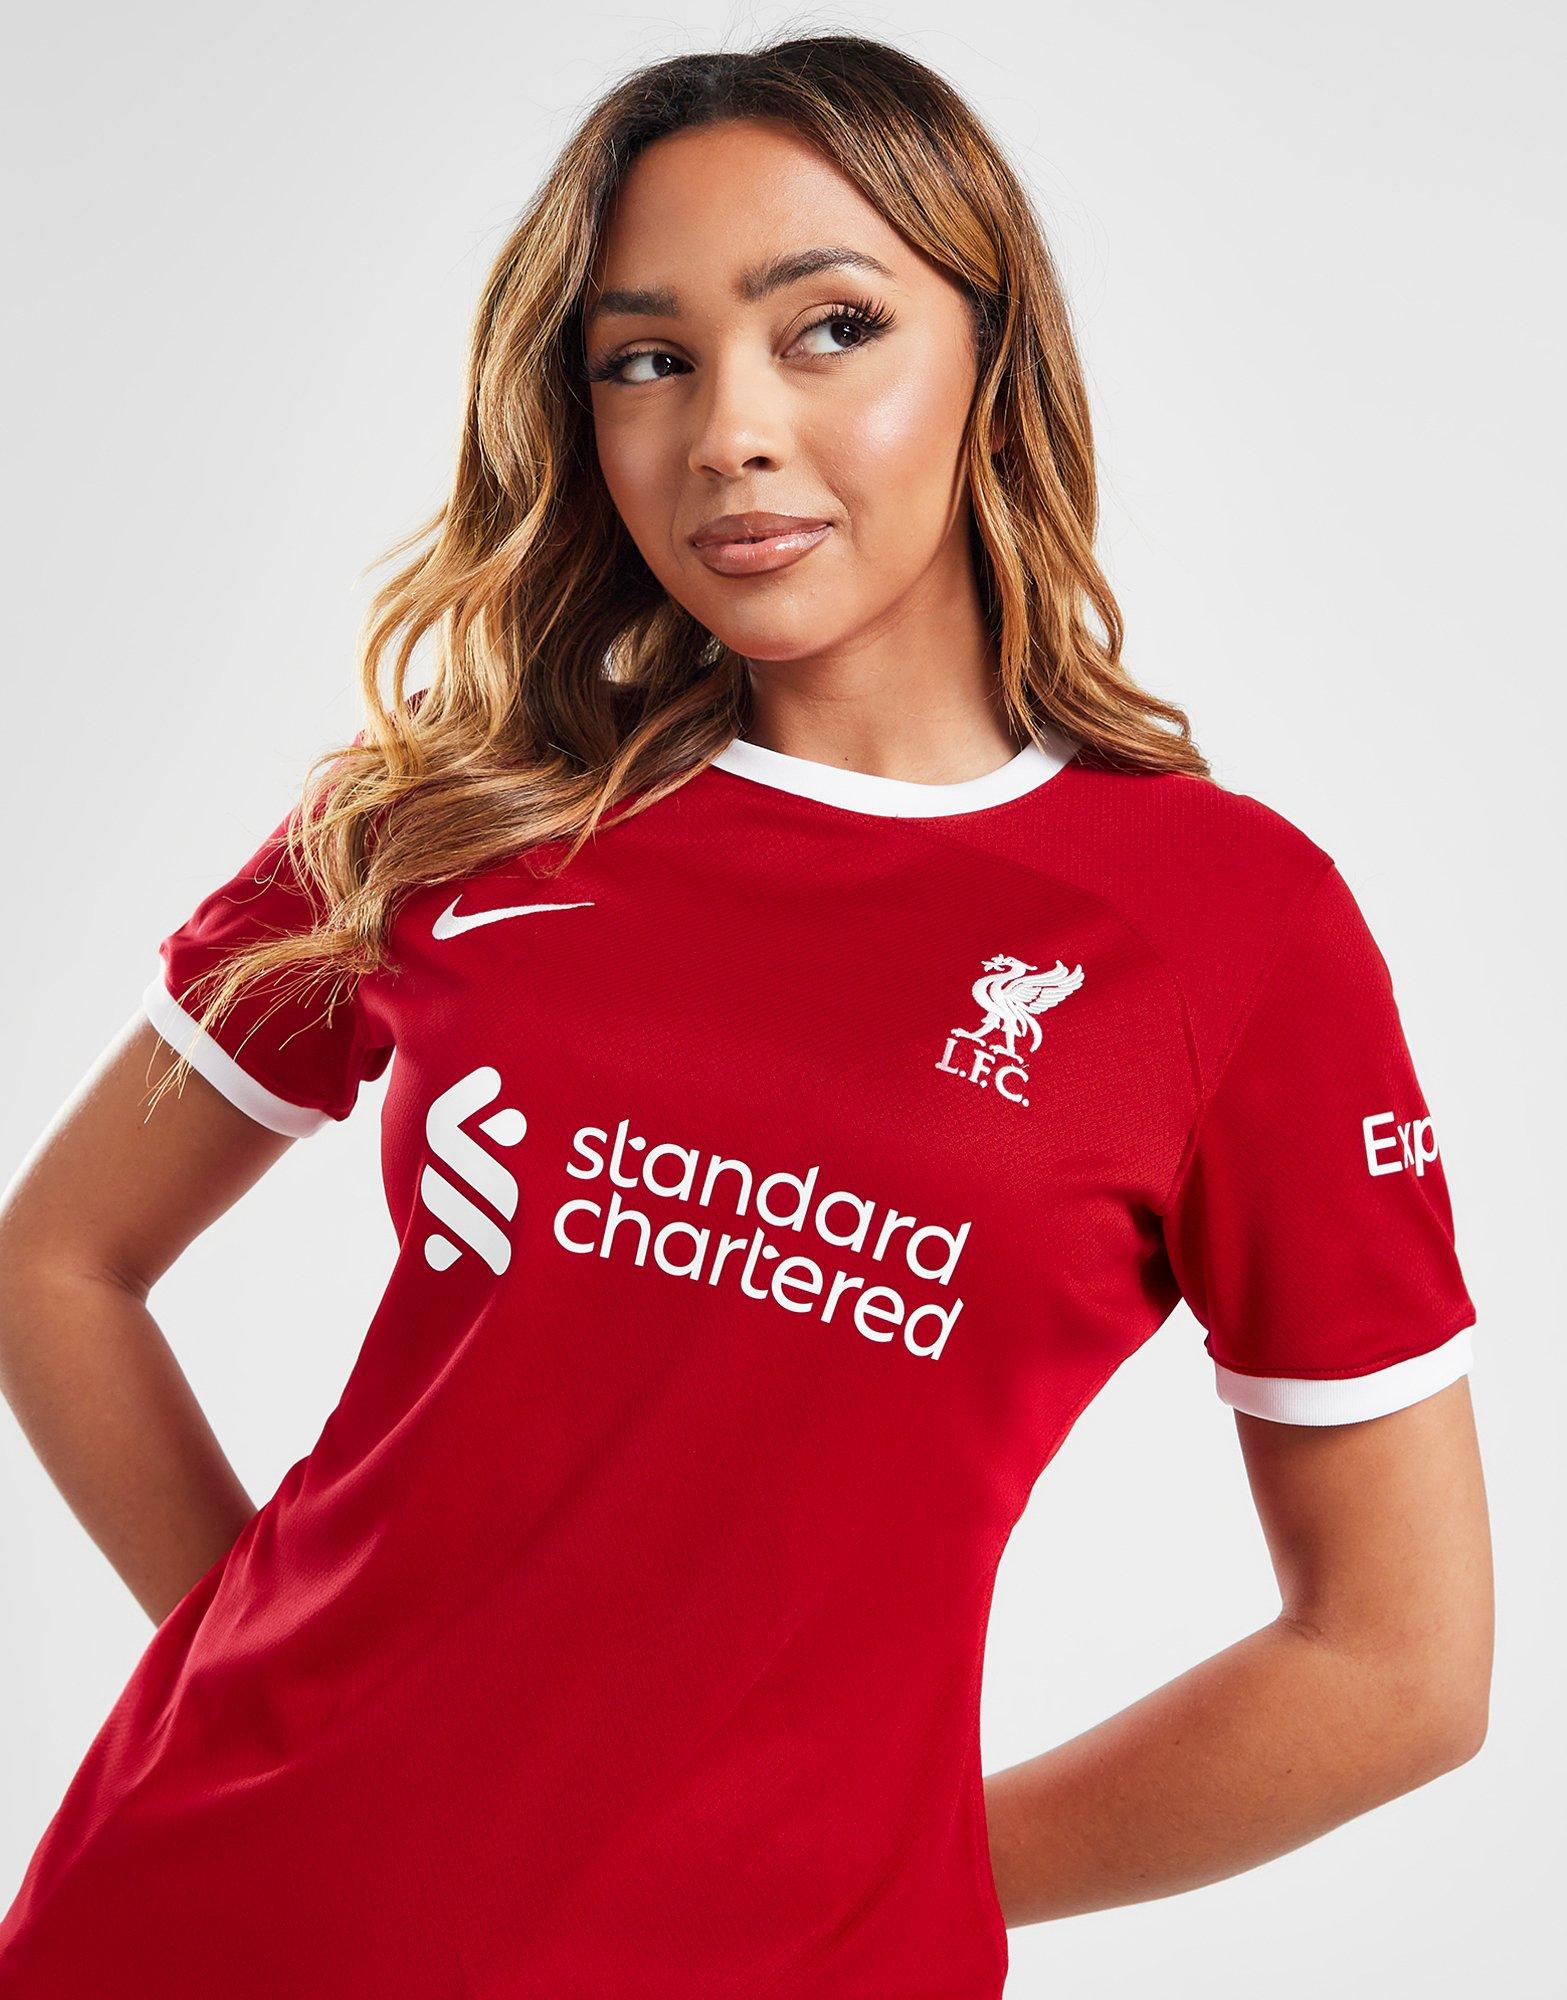 Liverpool girls are cup winners with average bra size of 34E